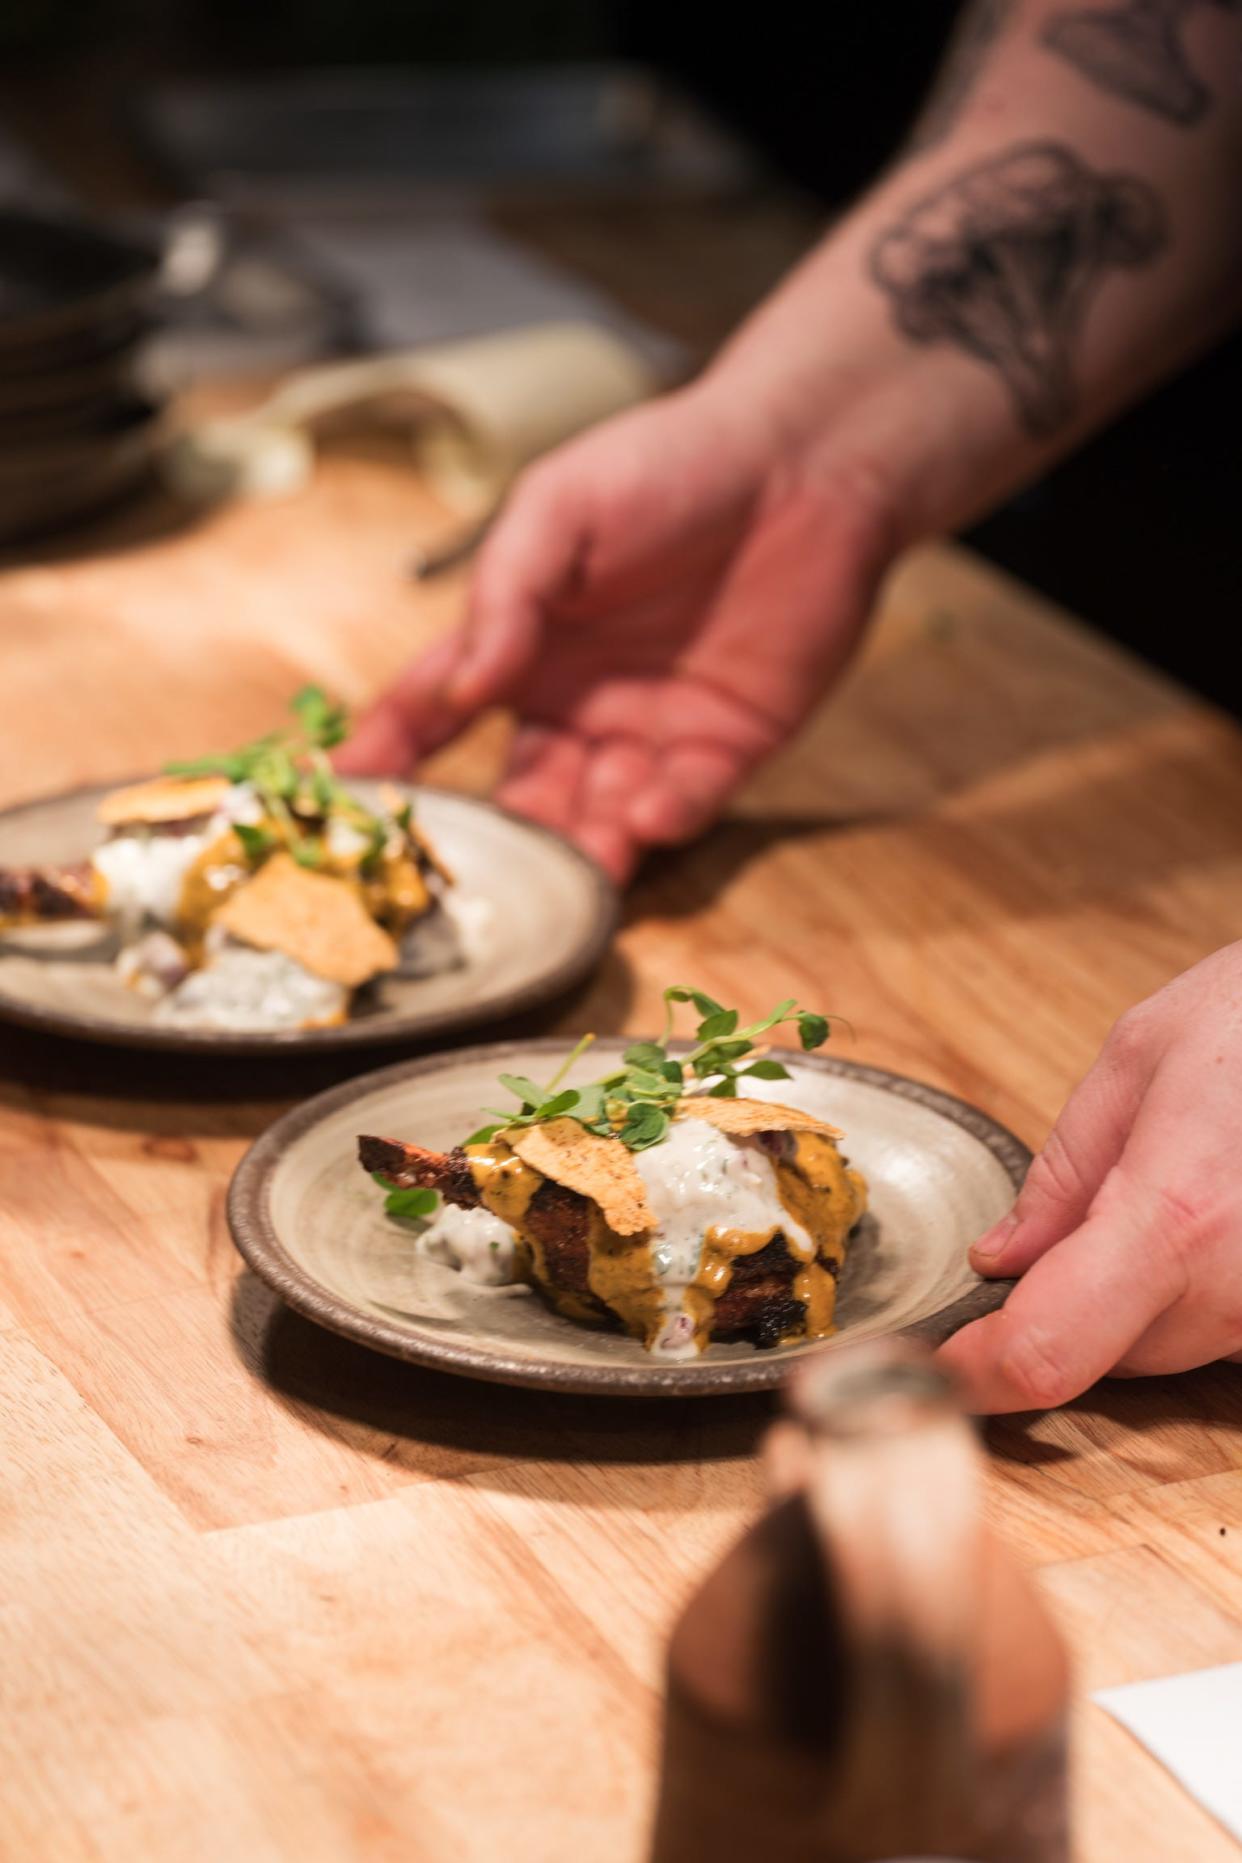 Eamonn McParland, owner and chef at Roselily, prepares a duck confit for a chef's table experience at the South Bend restaurant.